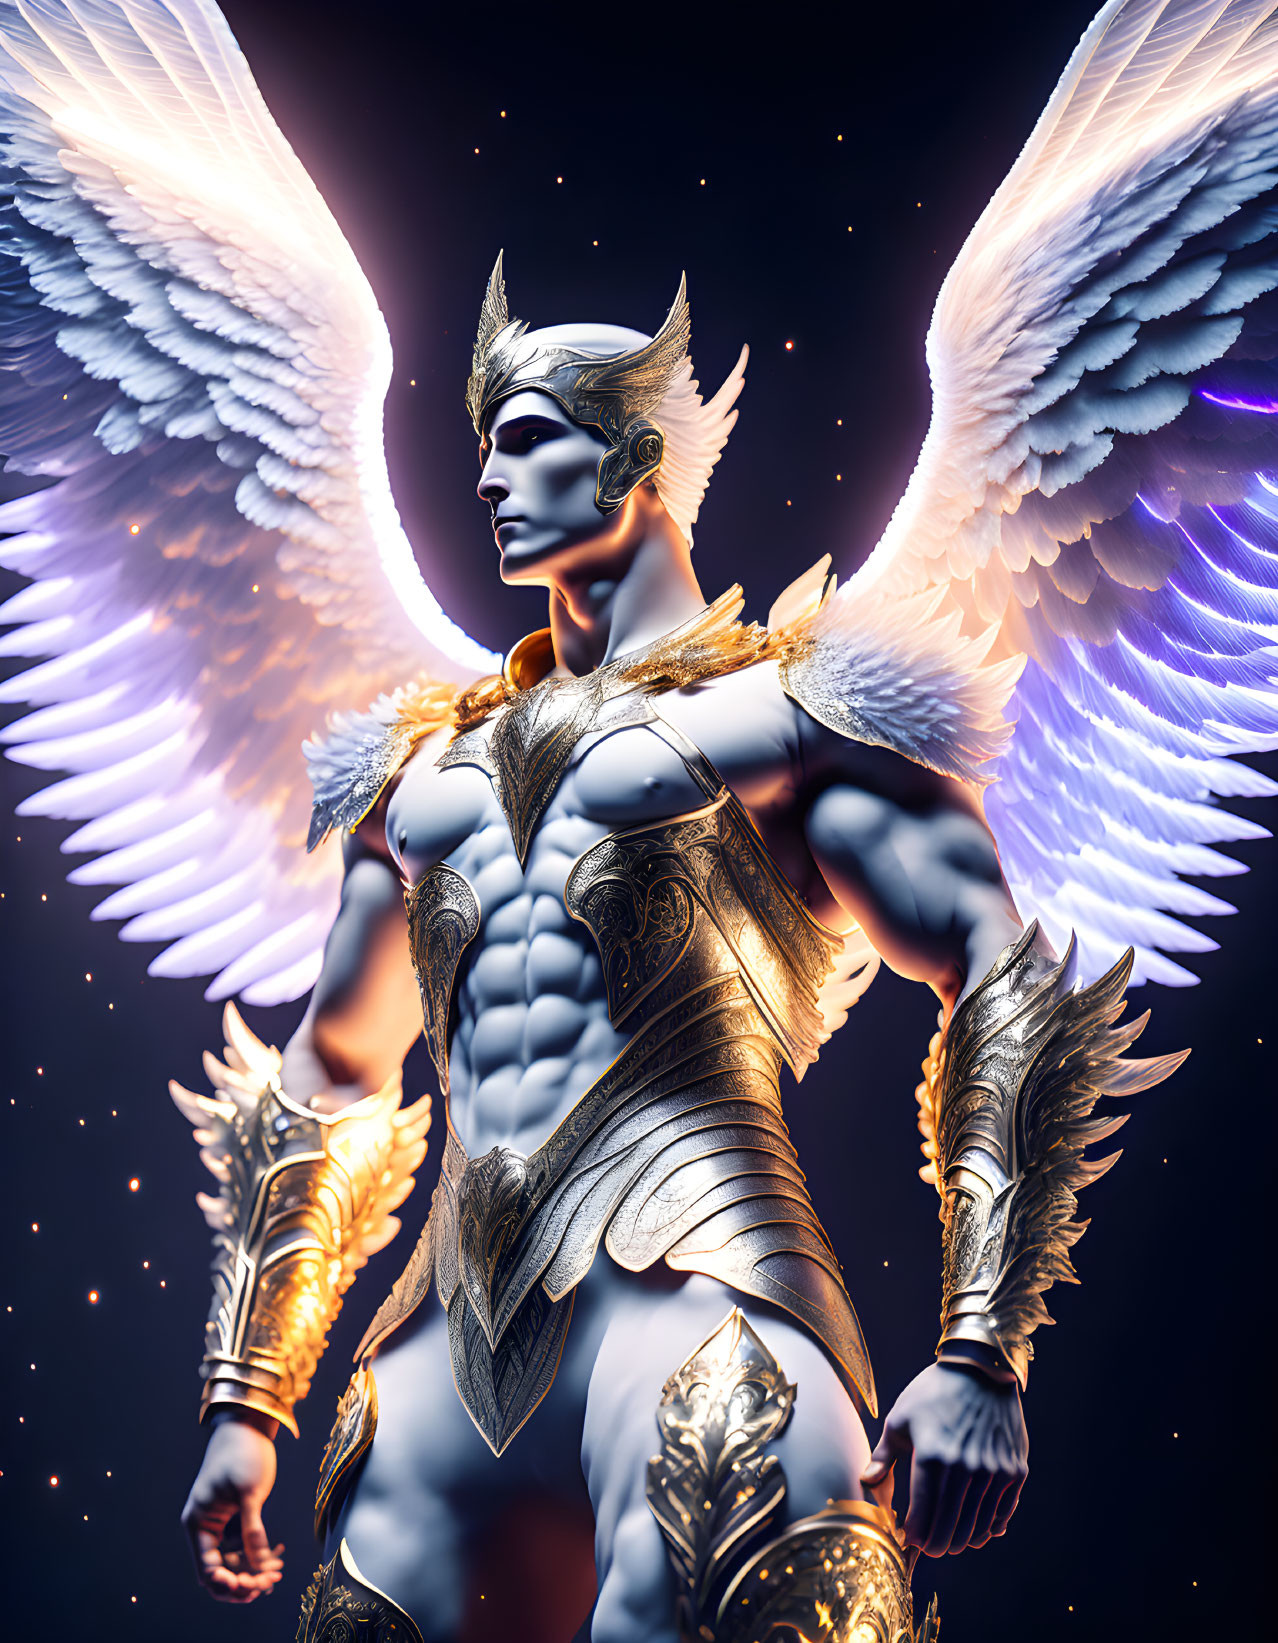 Muscular angelic figure in golden armor with white wings on dark background